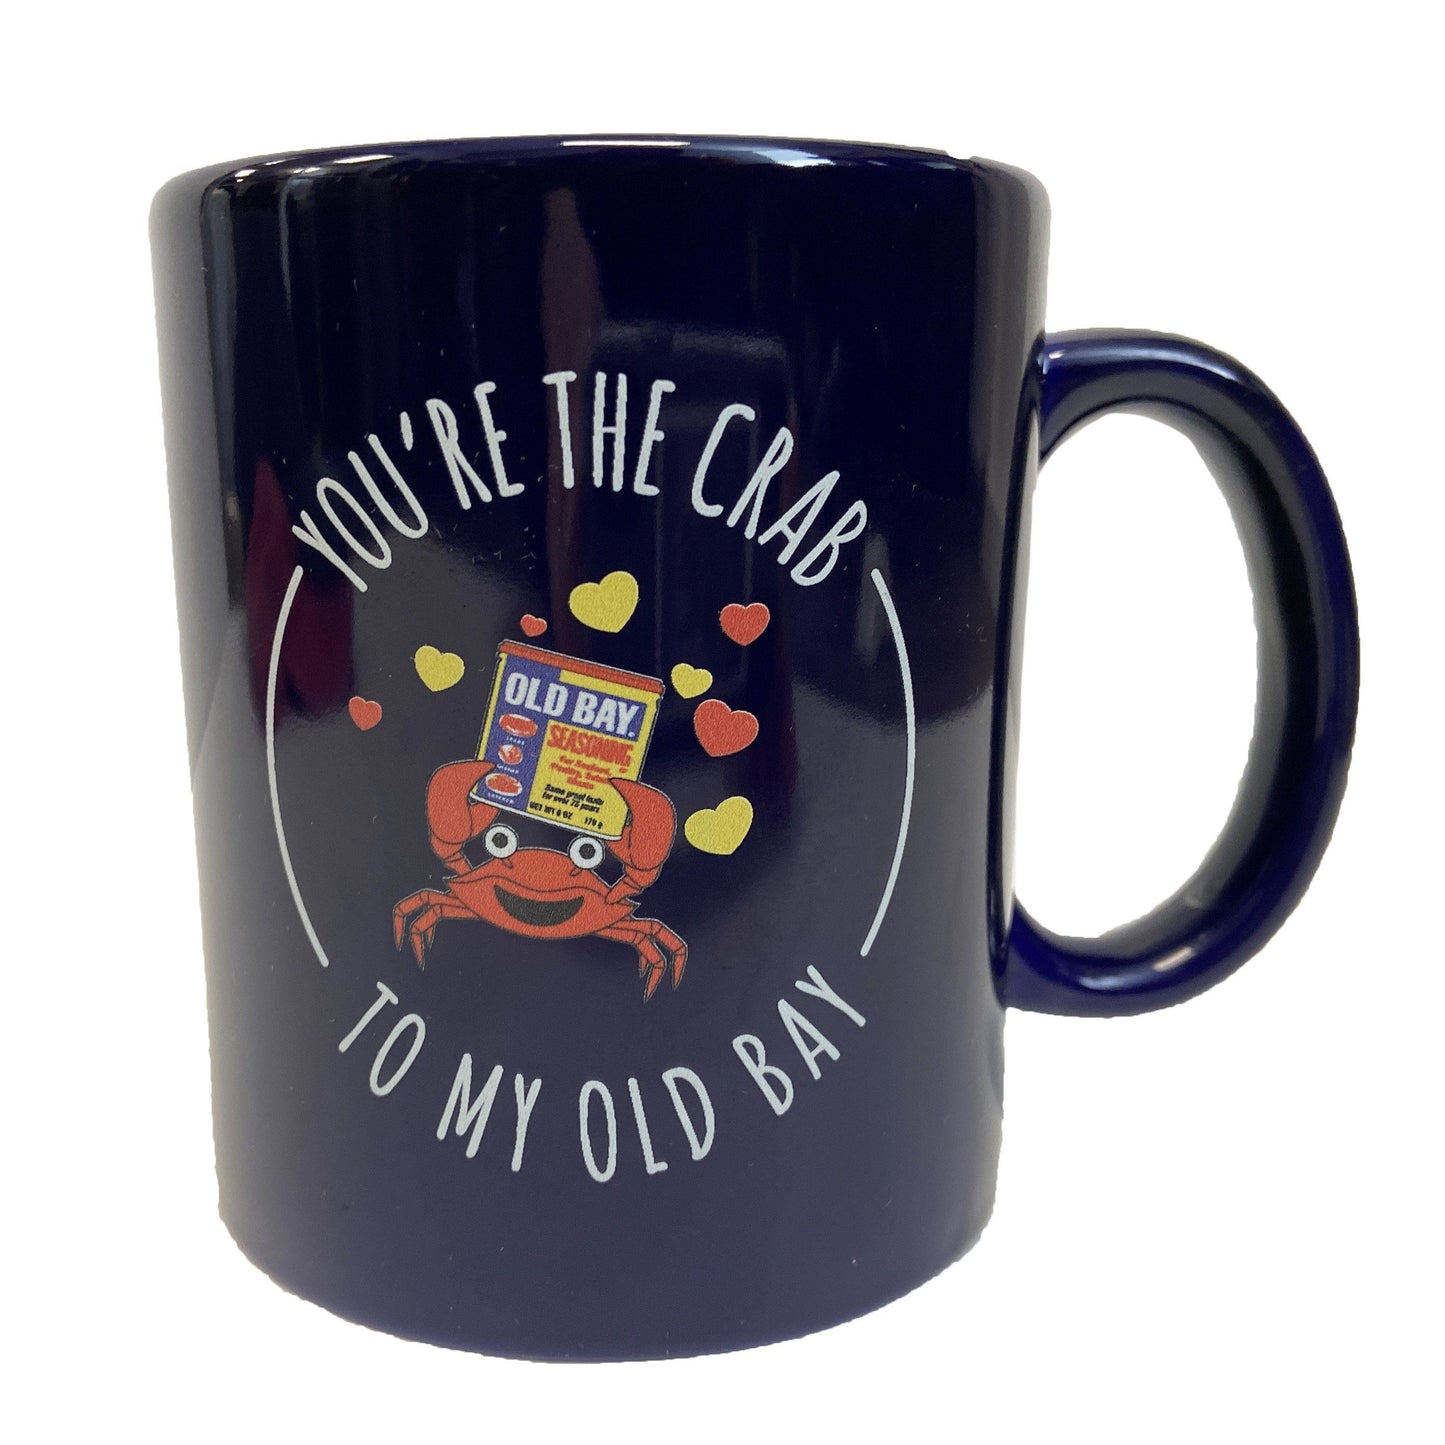 You're the Crab to My Old Bay / Mug - Route One Apparel